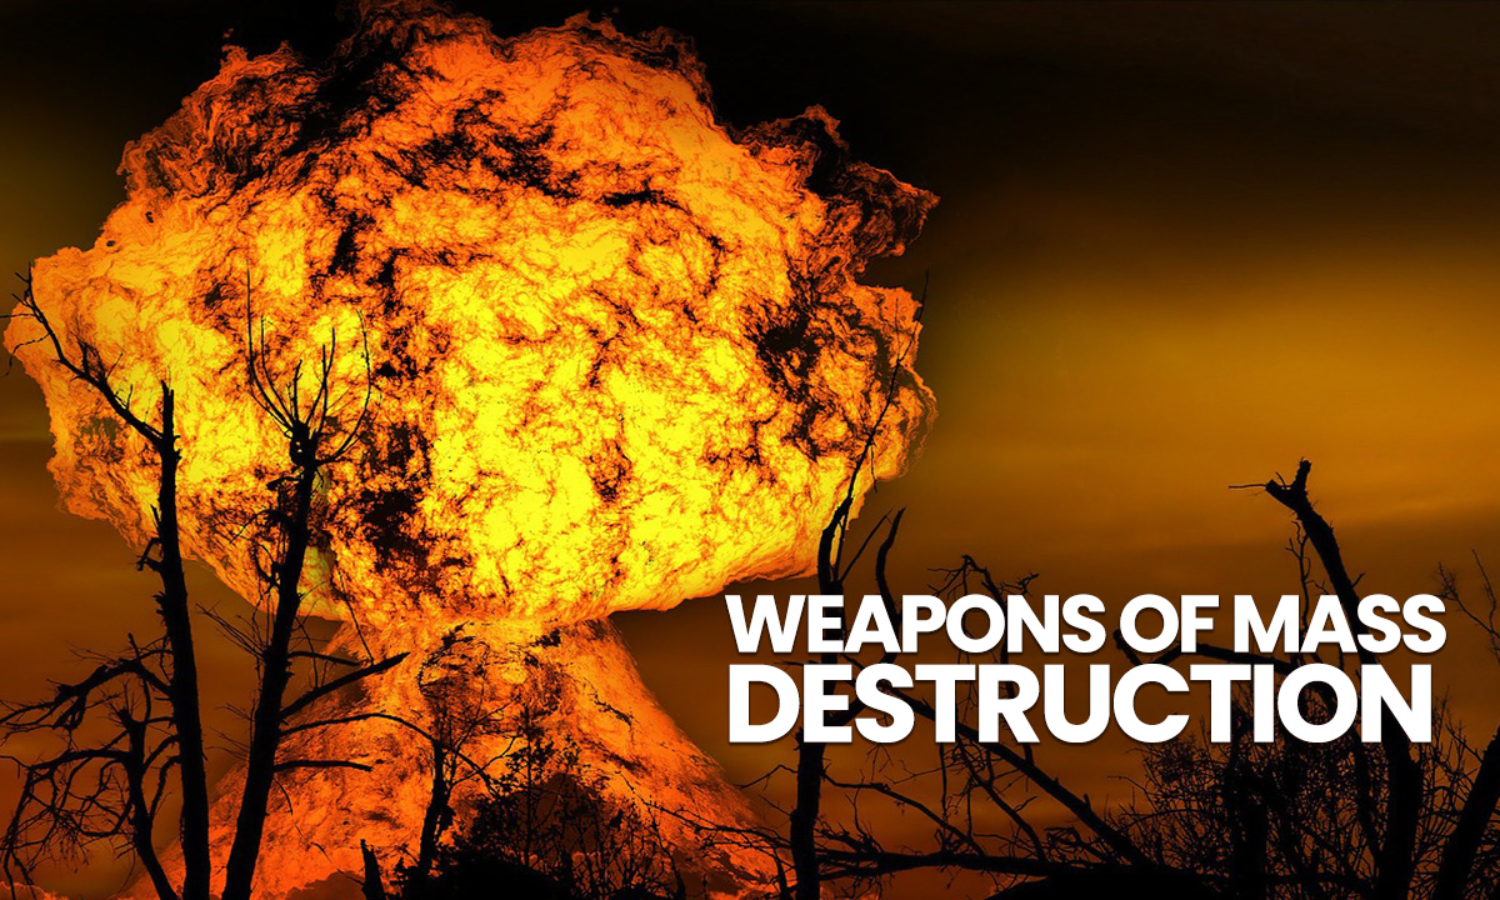 UN Updates Weapons of Mass Destruction List To Include Uno Reverse